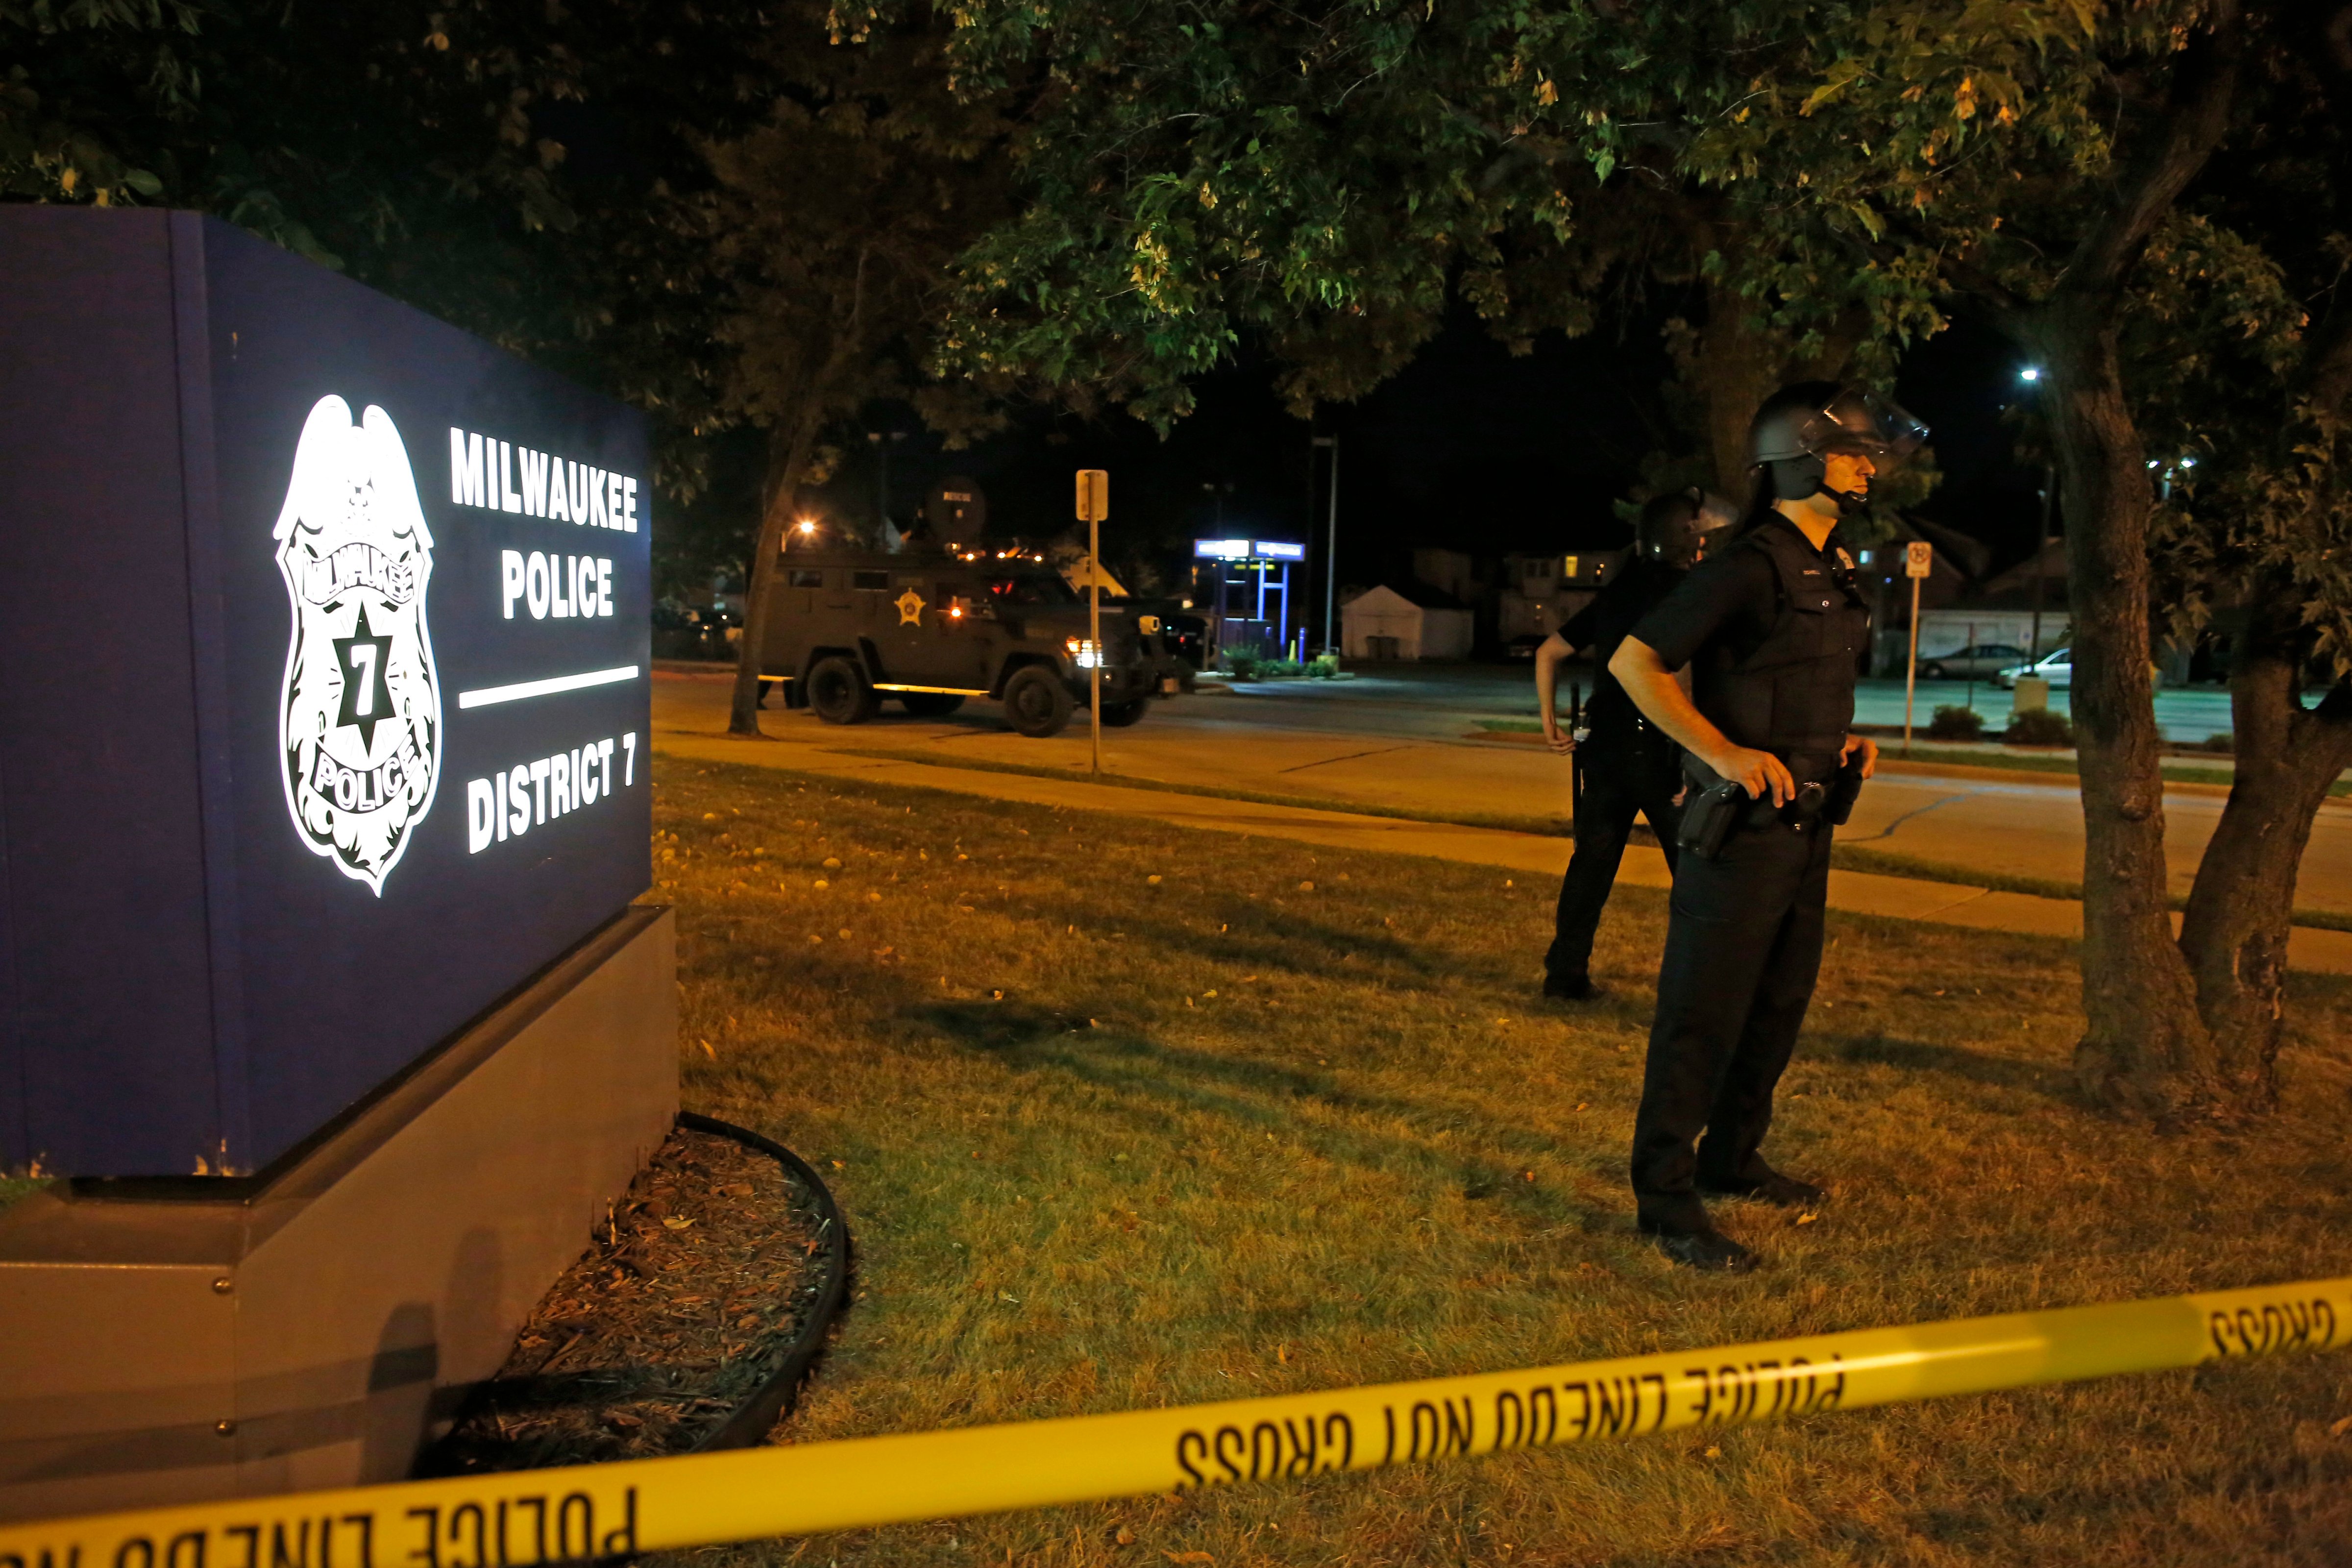 Police guard a police station in Milwaukee Aug. 14, 2016. Police said one person was shot at a Milwaukee protest on Sunday evening and officers used an armored vehicle to retrieve the injured victim during a second night of unrest over the police shooting of 23-year-old Sylville Smith. (Jeffrey Phelps—AP)